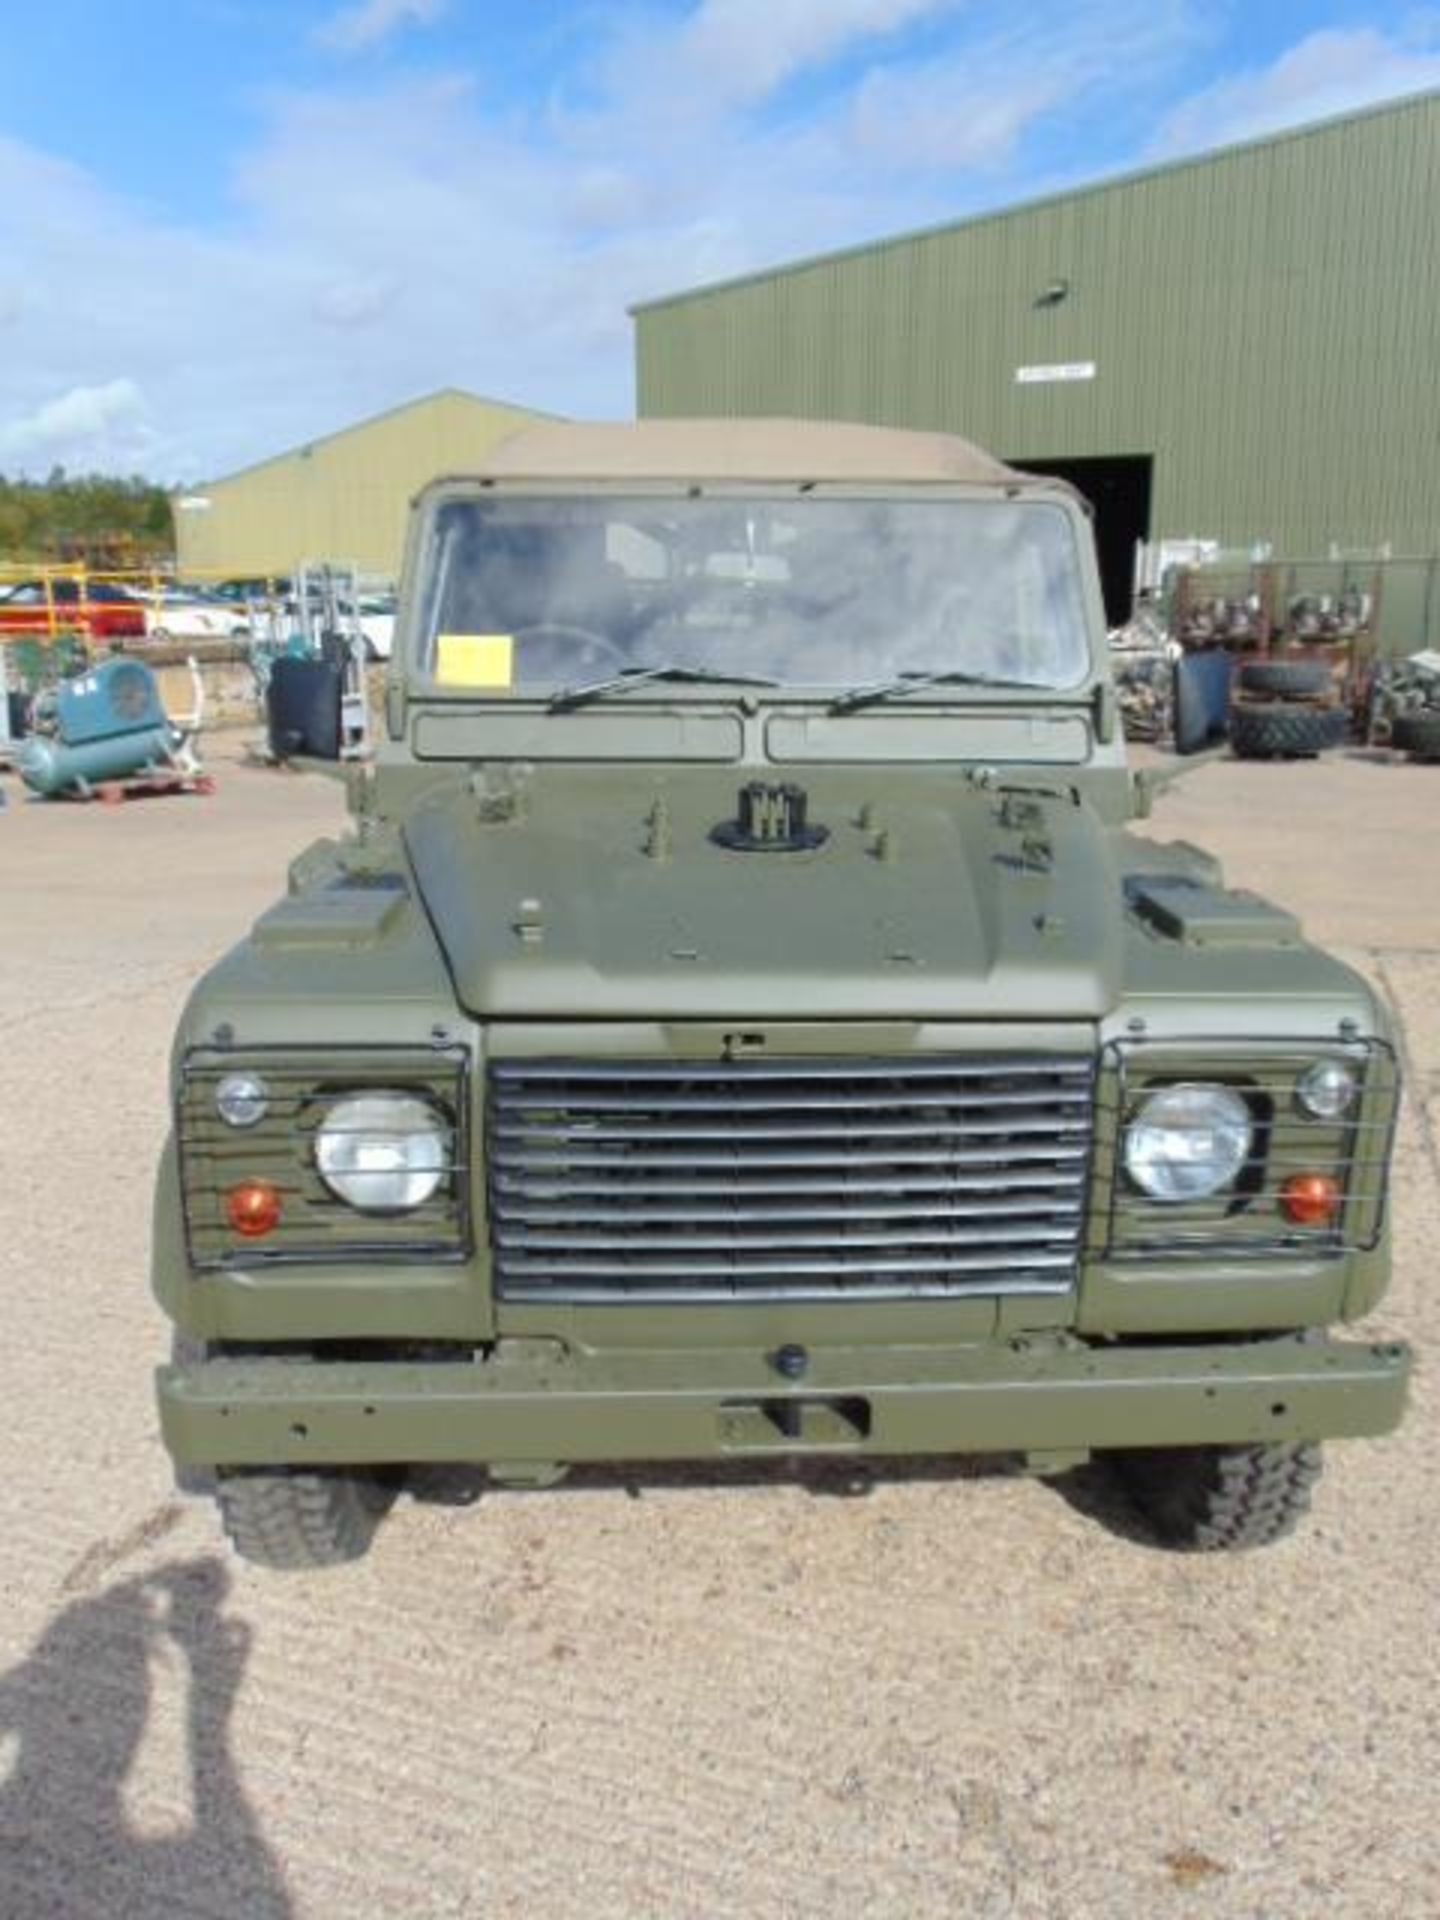 Military Specification Land Rover Wolf 110 Soft Top - Image 2 of 21